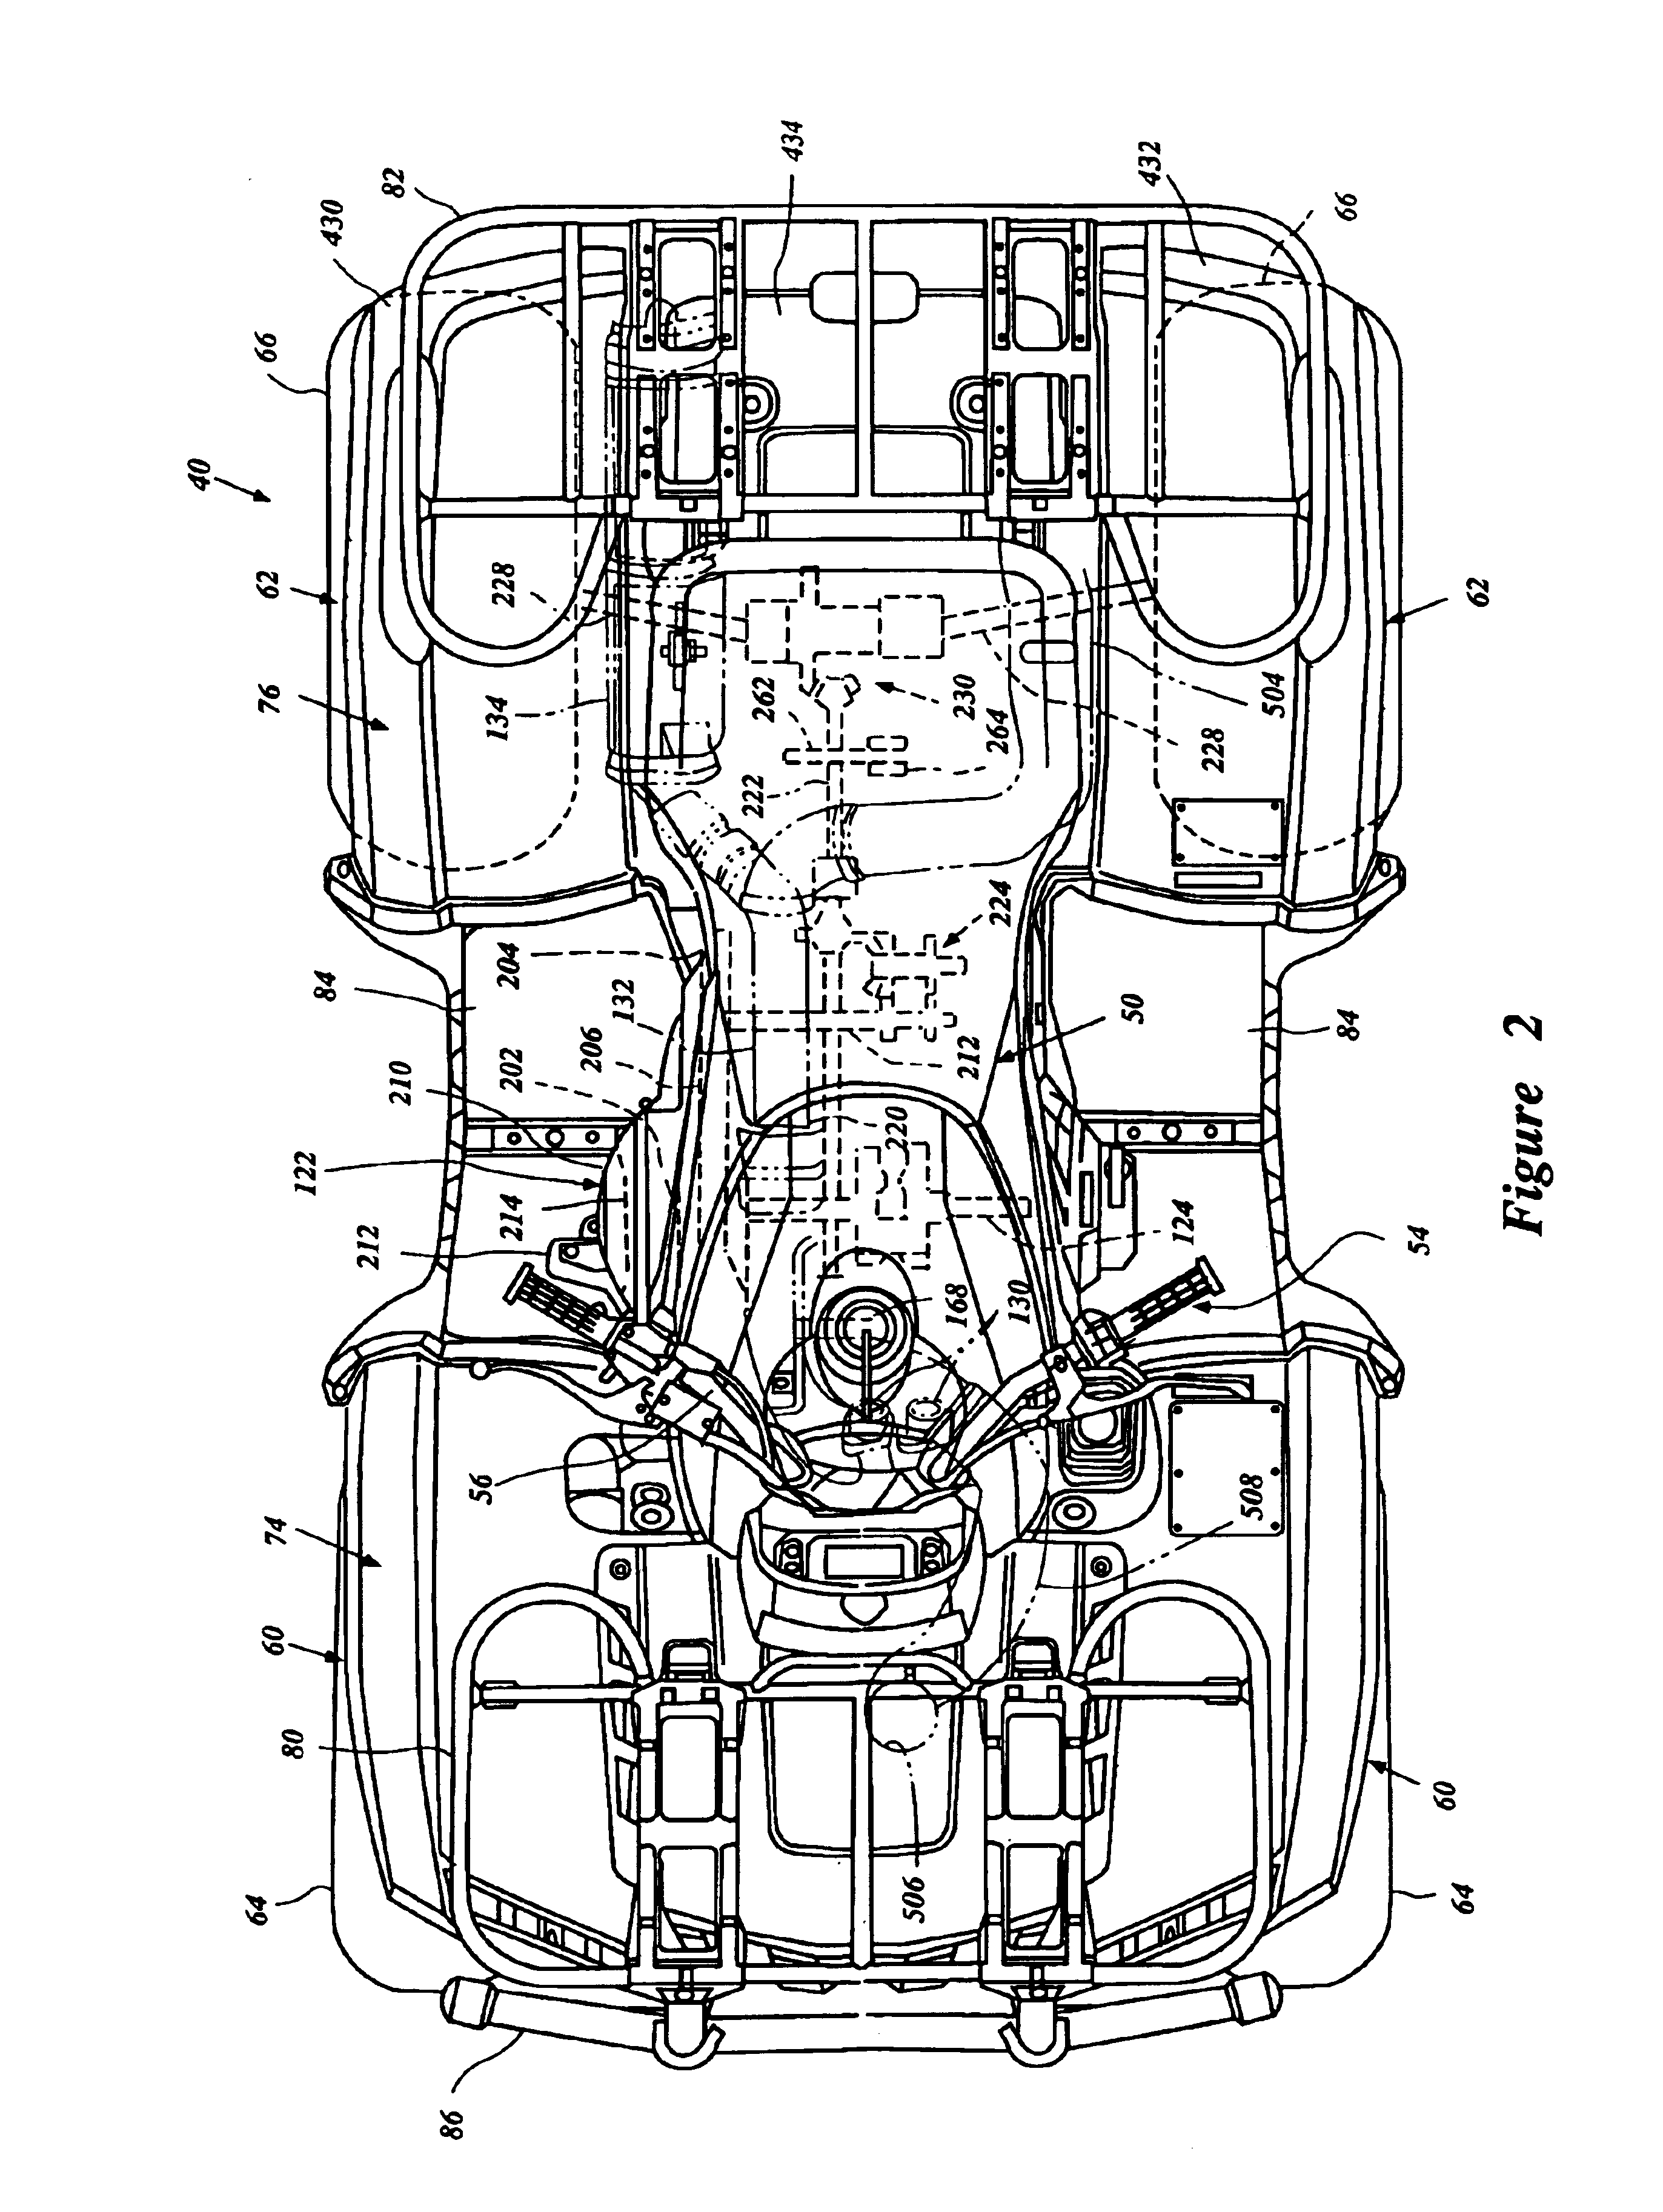 Cooling air system for small vehicle